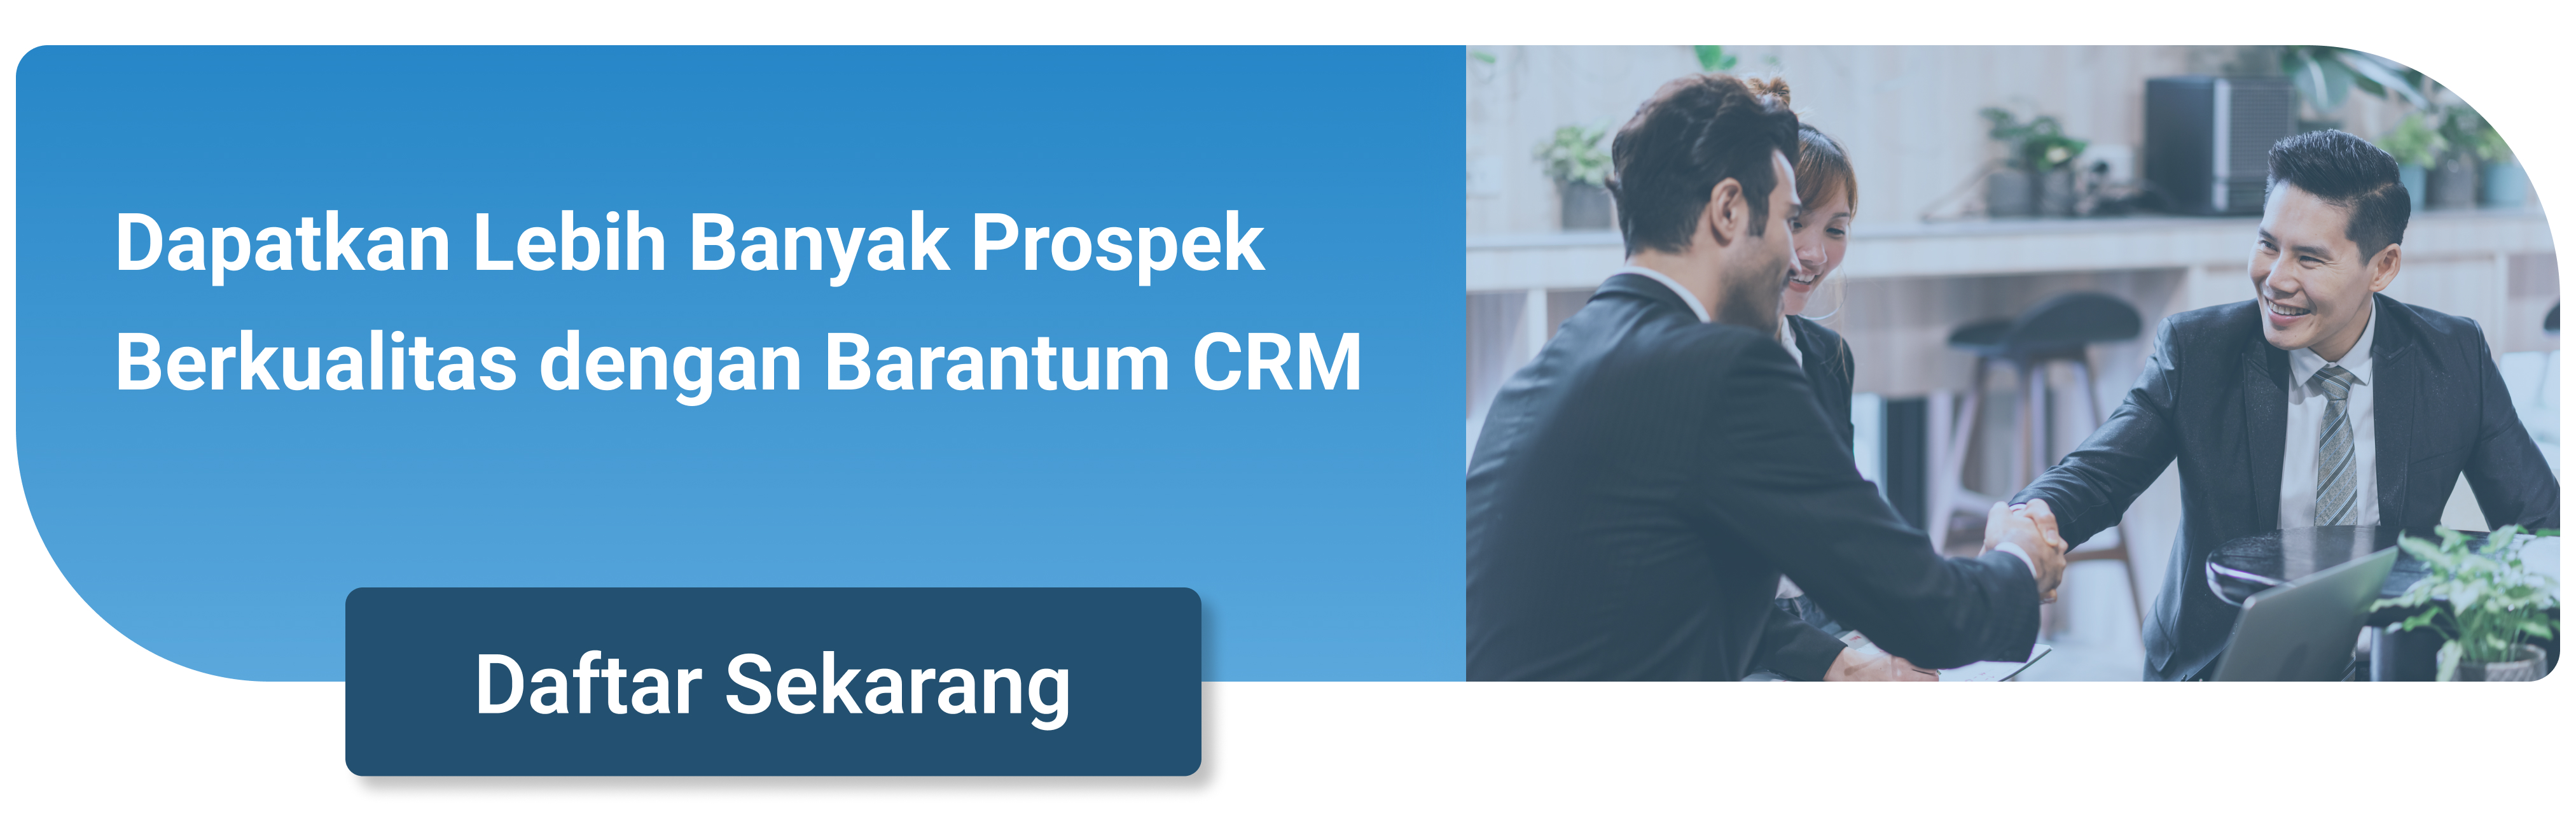 Barantum CRM - CRM, Chat & Call Center Software